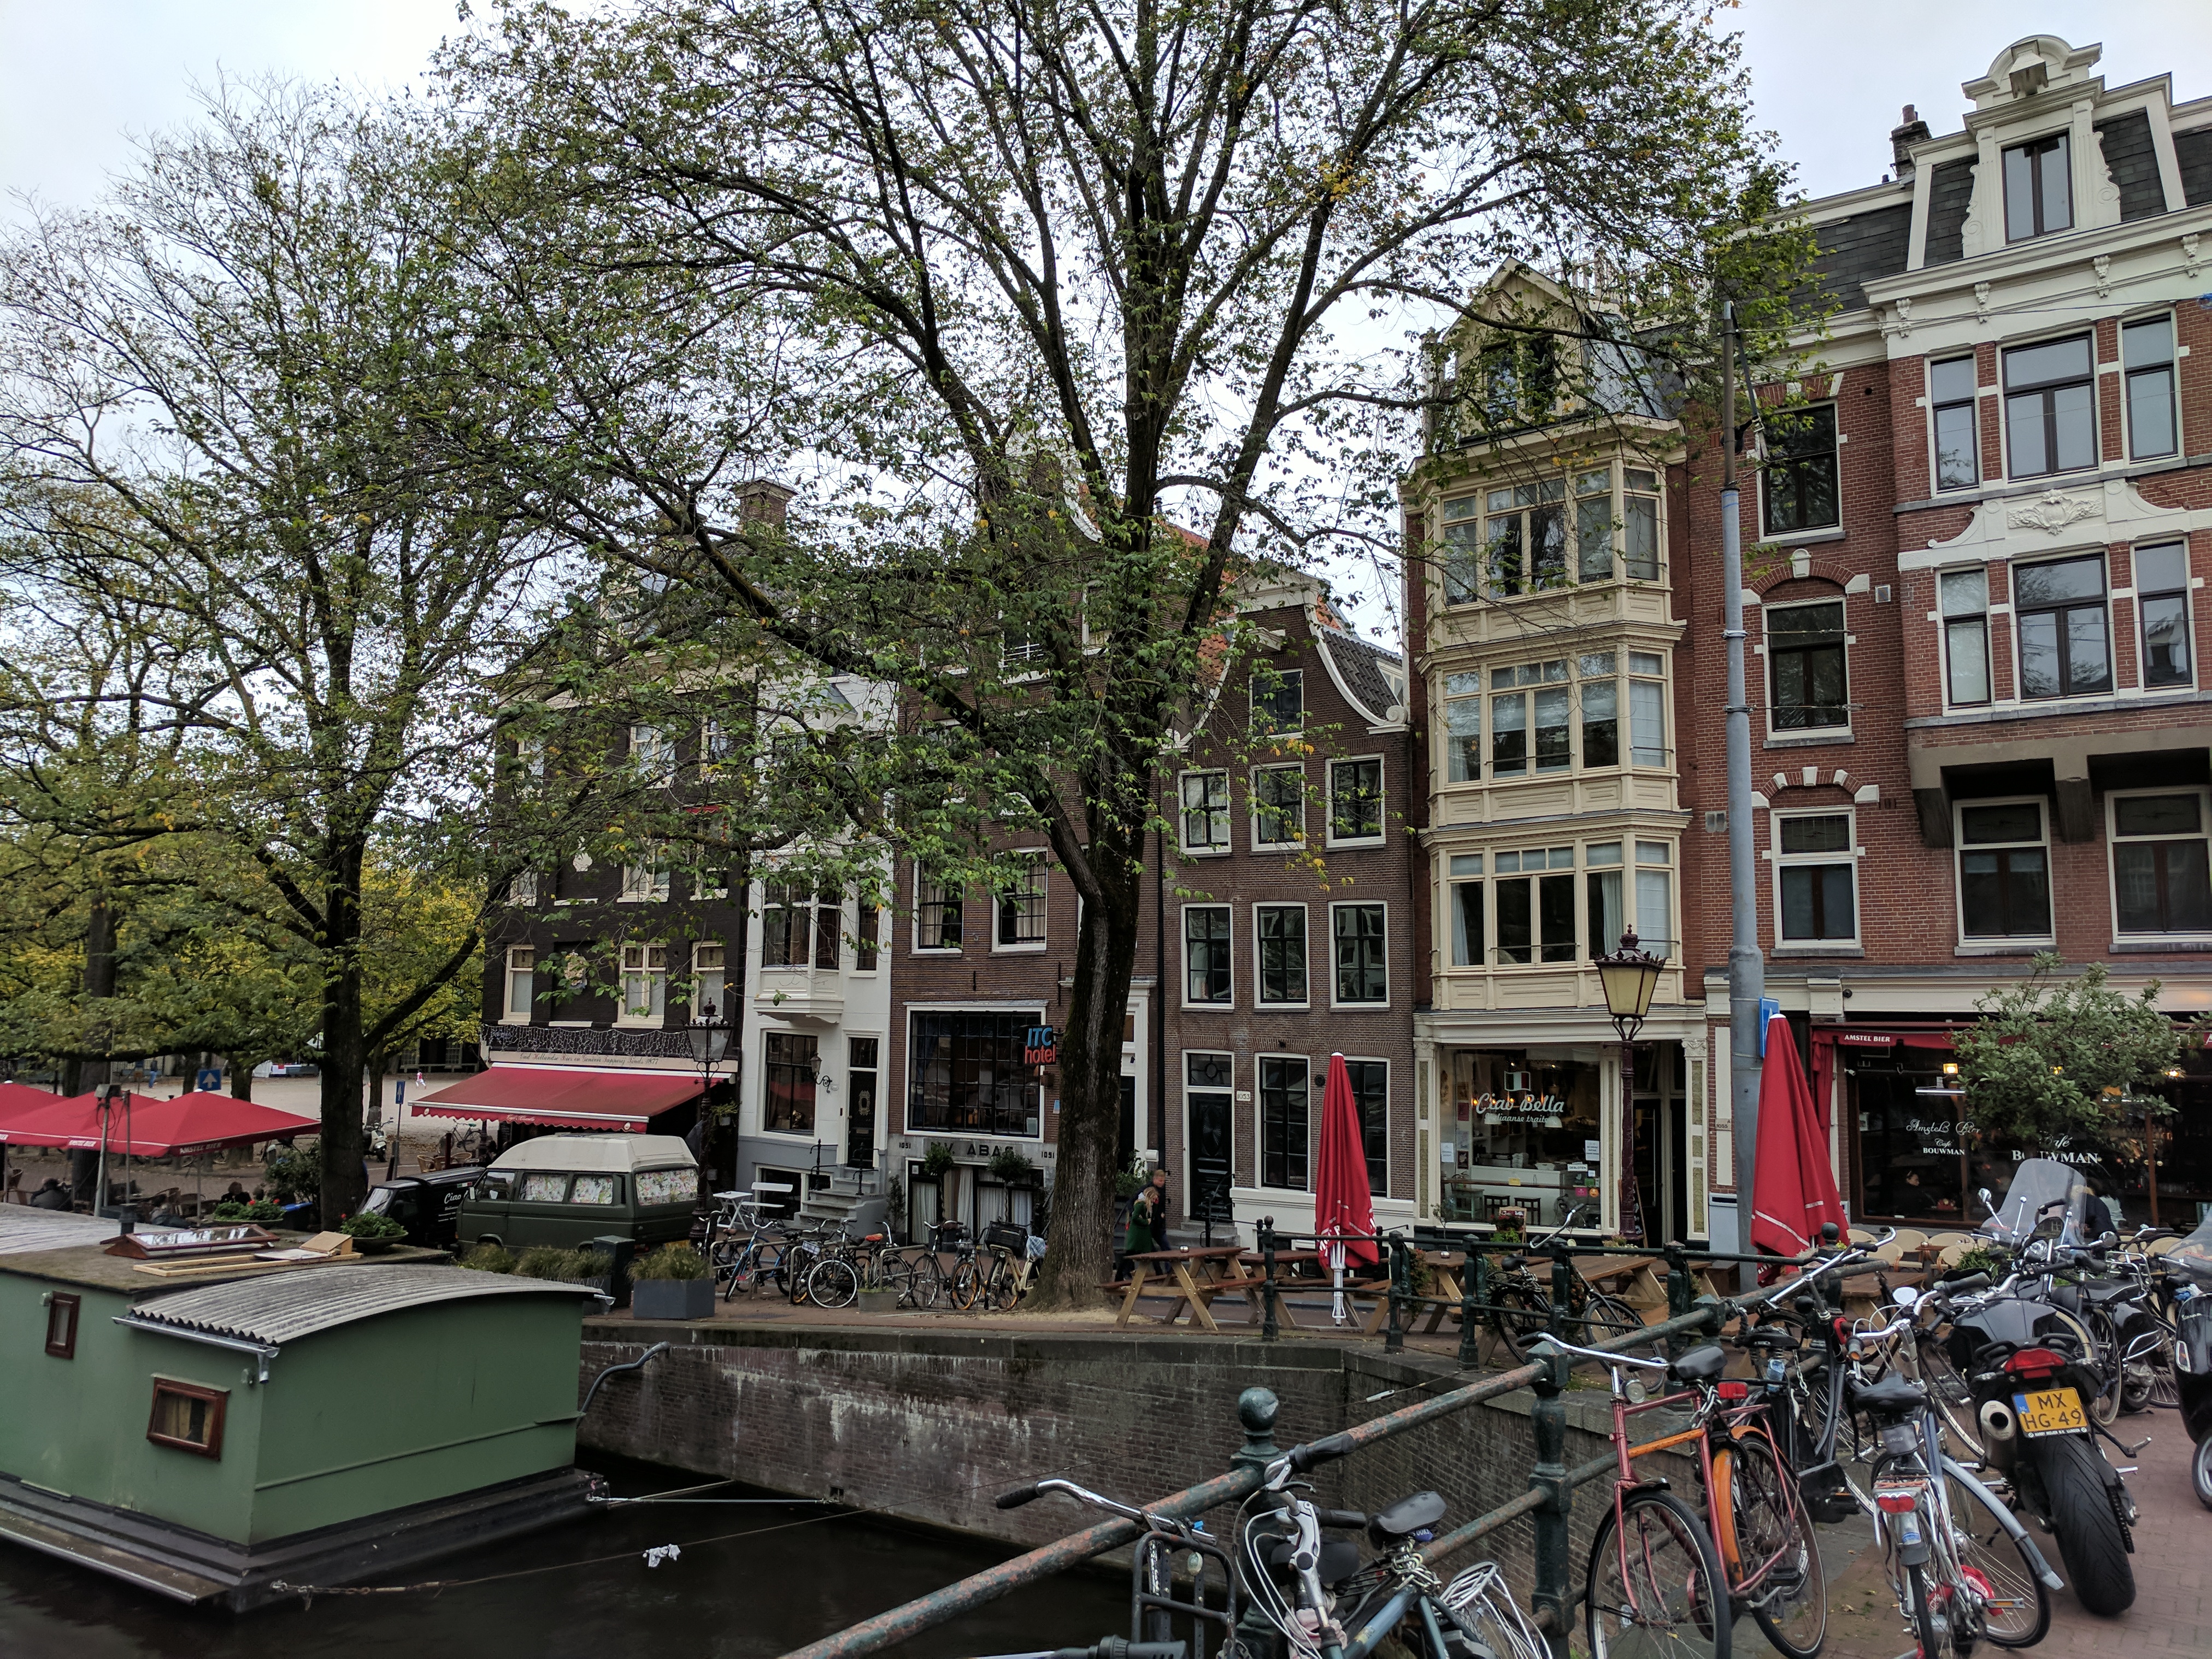 An Amsterdam street with tall narrow houses. A houseboat in the foreground.